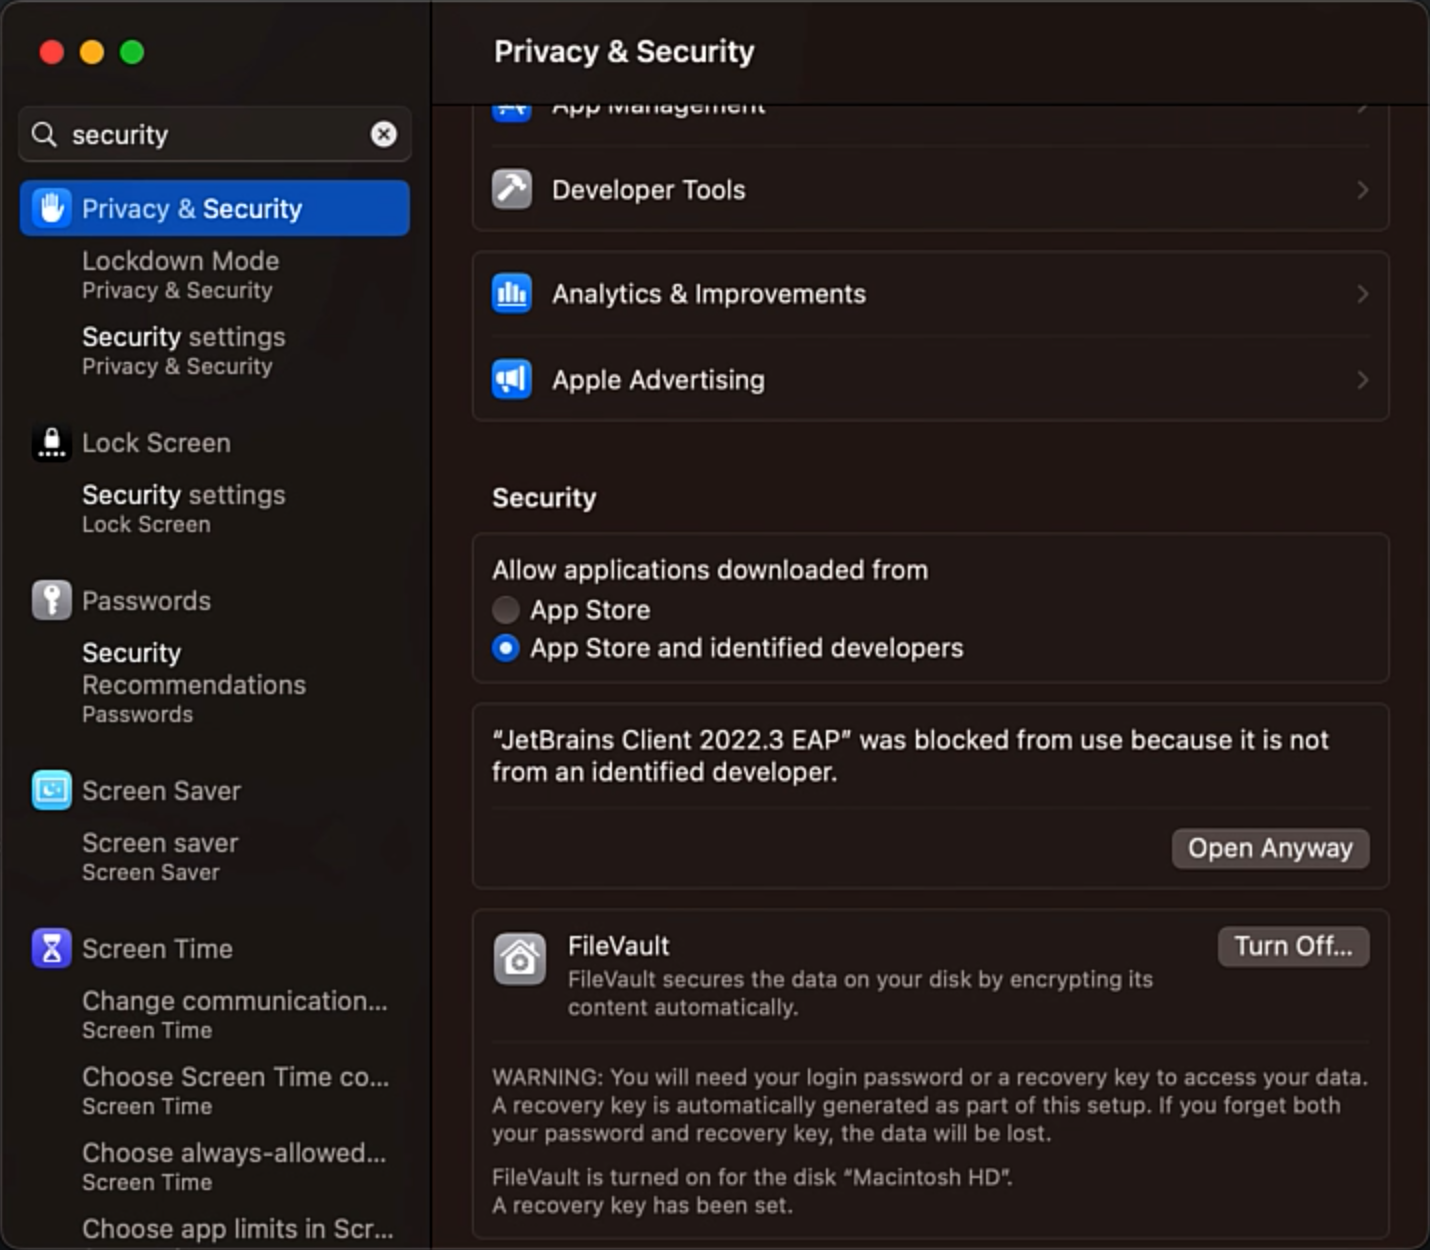 Screenshot of the Privacy & Security dialog